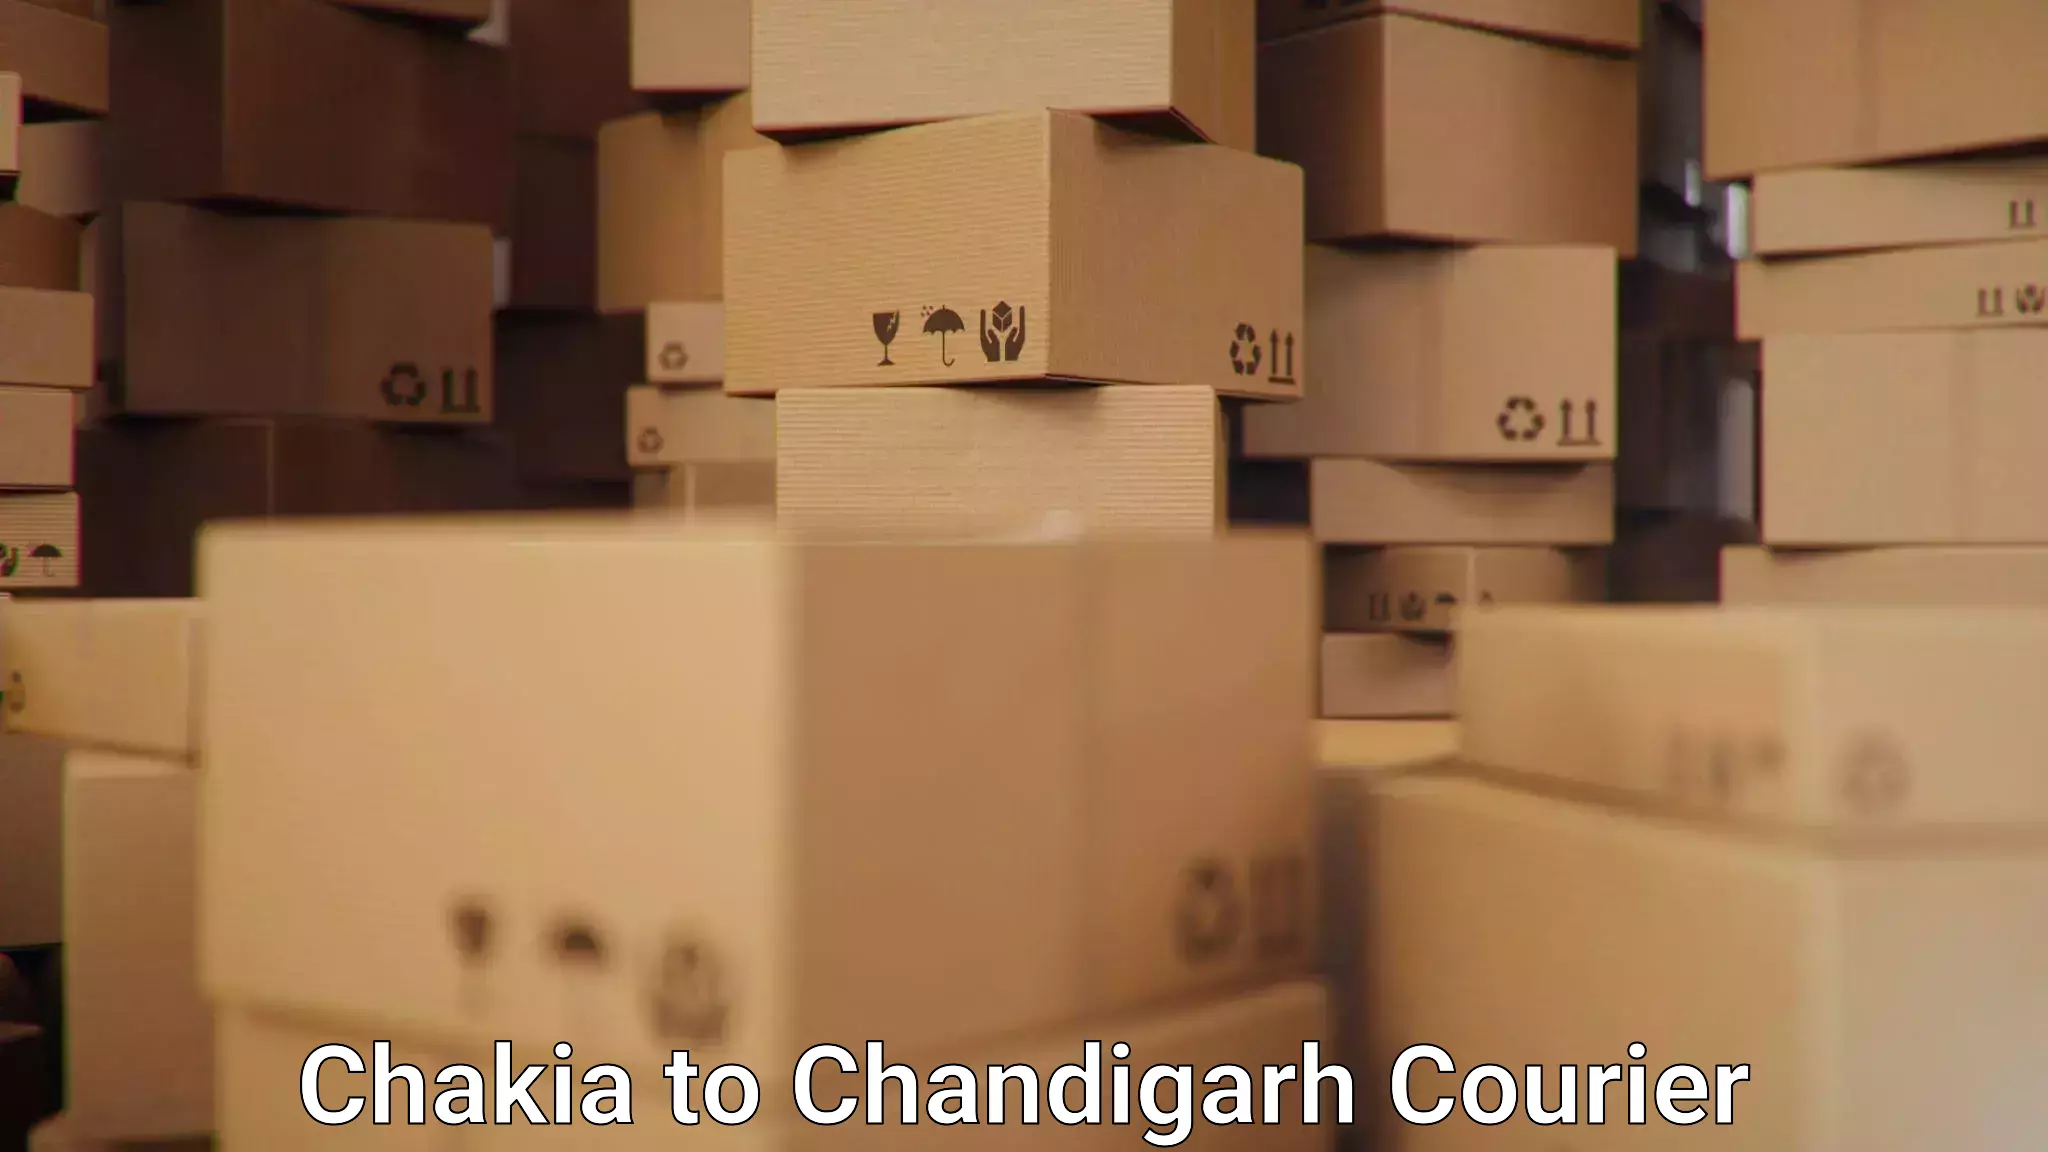 24/7 courier service Chakia to Chandigarh